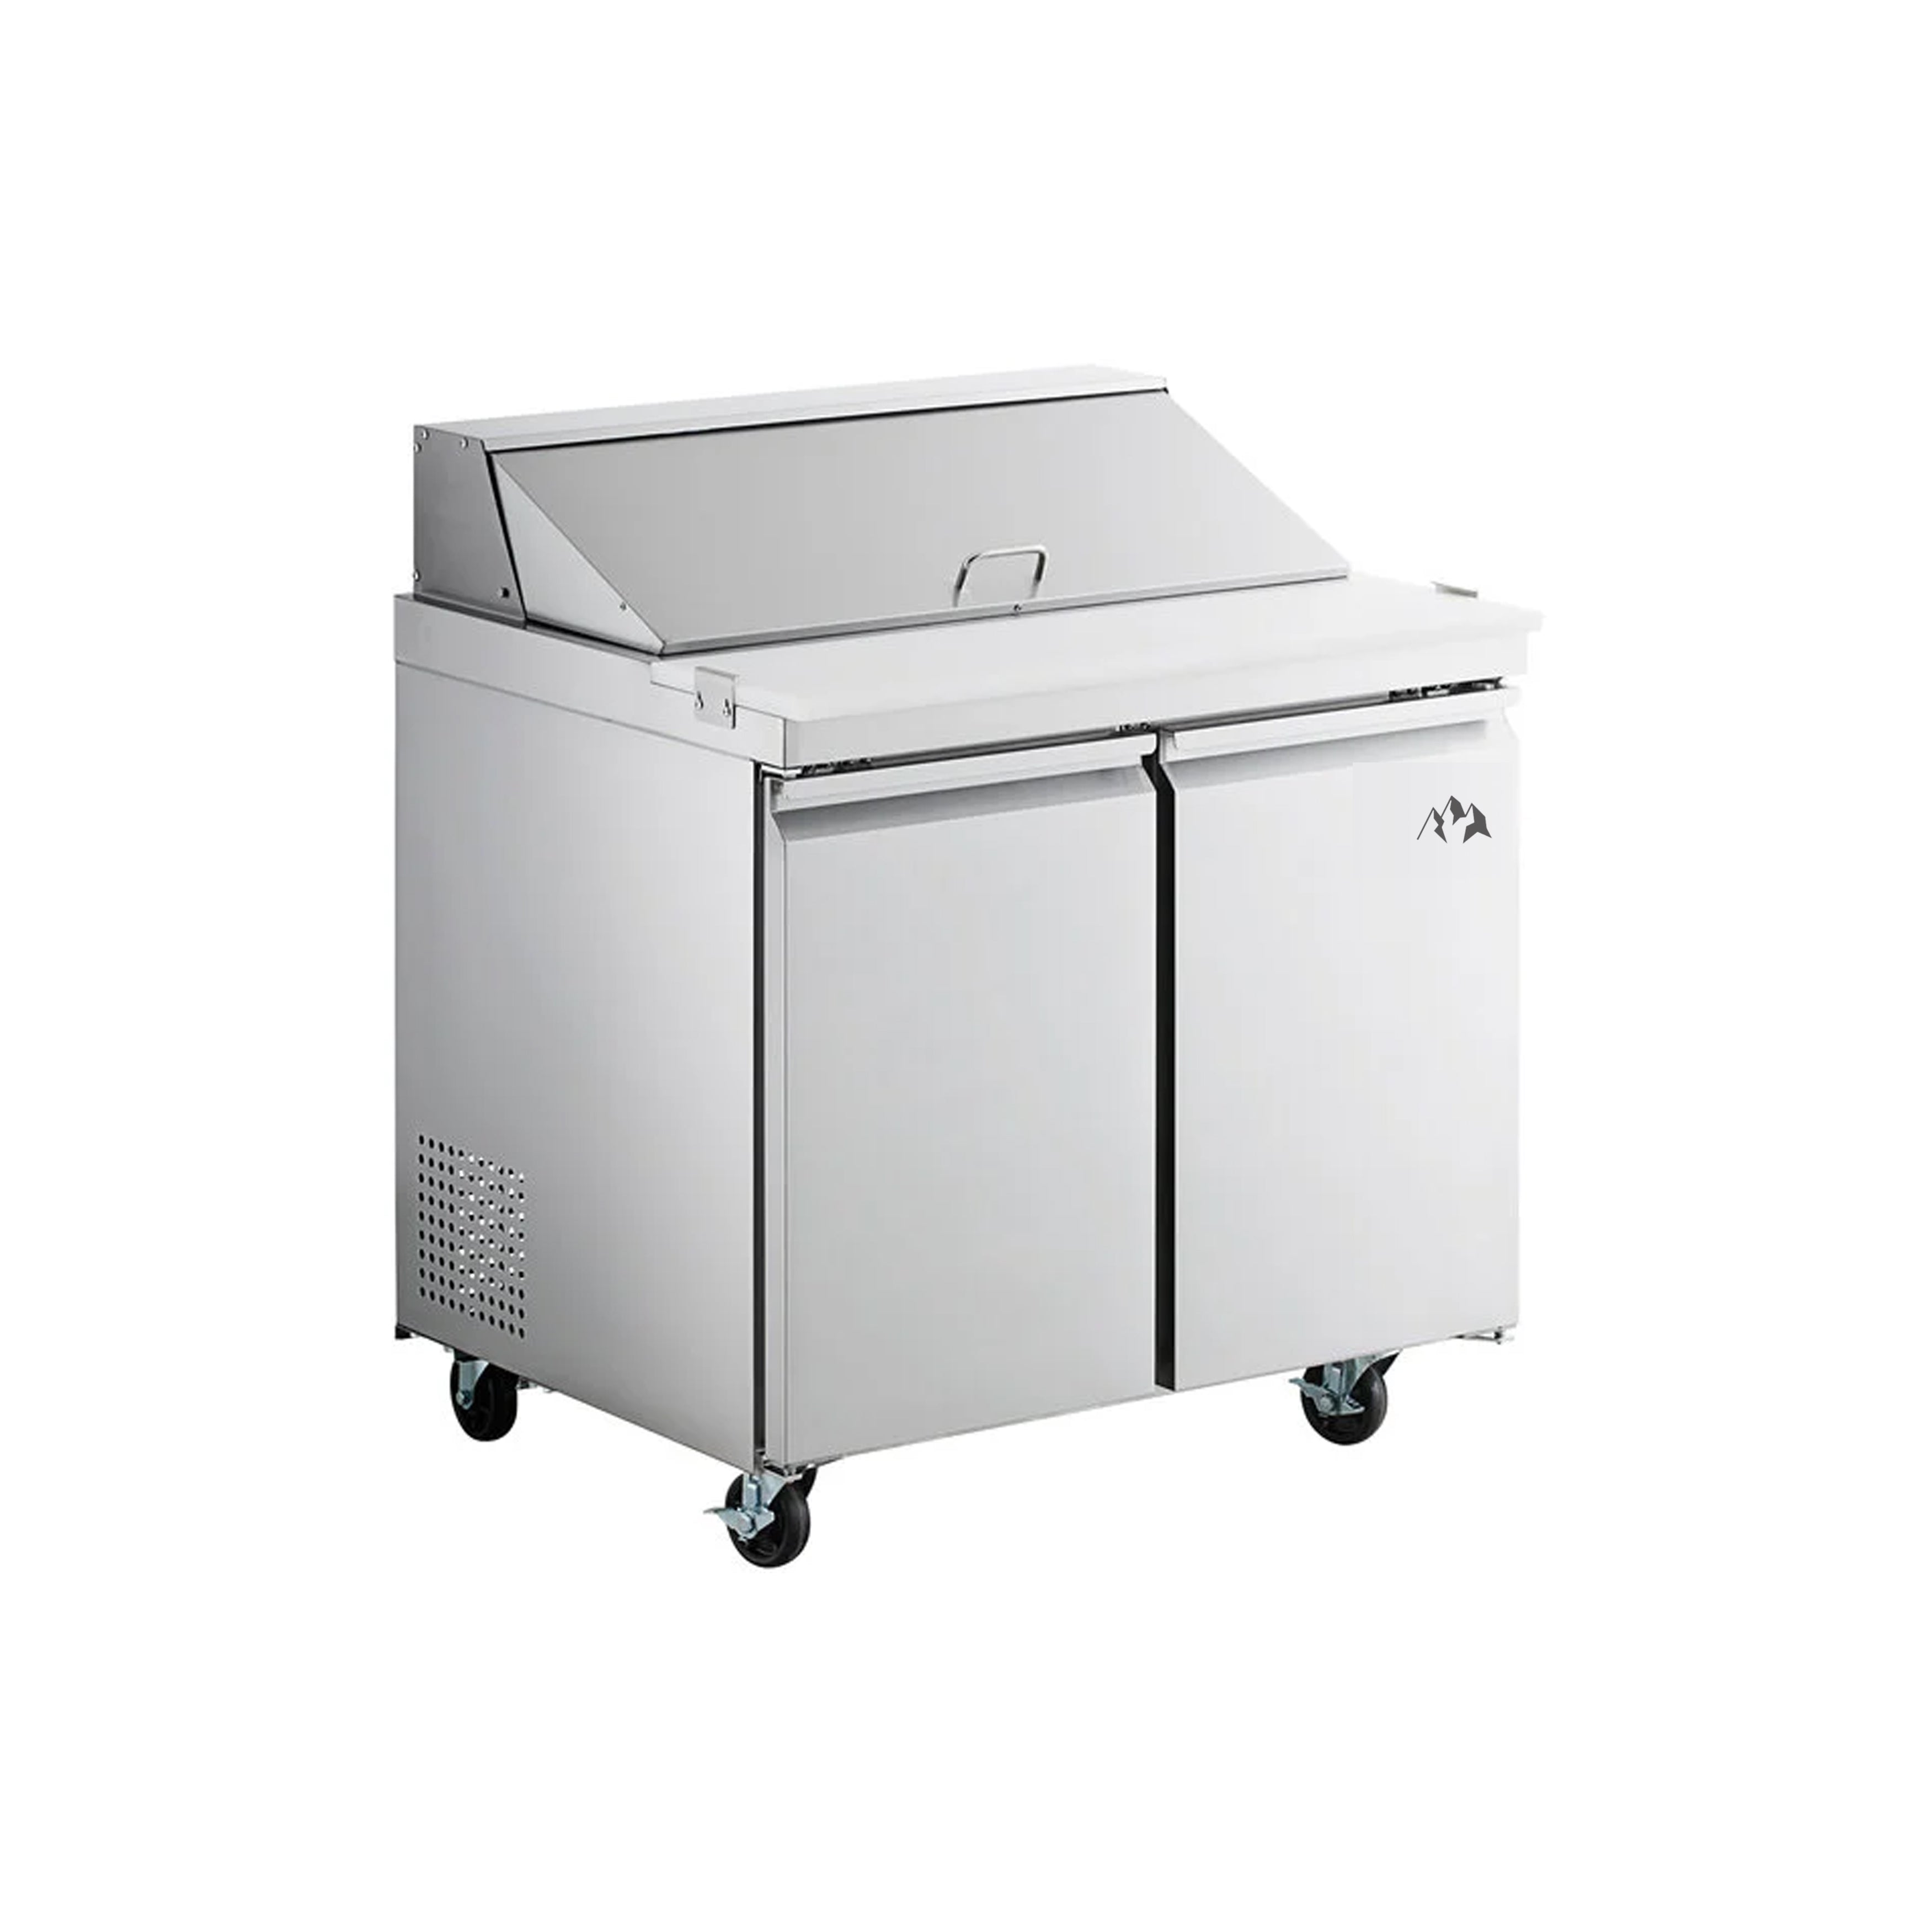 Chef AAA - SS-PT-36M-HC, Commercial 36" Sandwich Prep Table Refrigerator MEGA TOP 15 Pans 2 Door Stainless Steel 7.6 cu.ft.